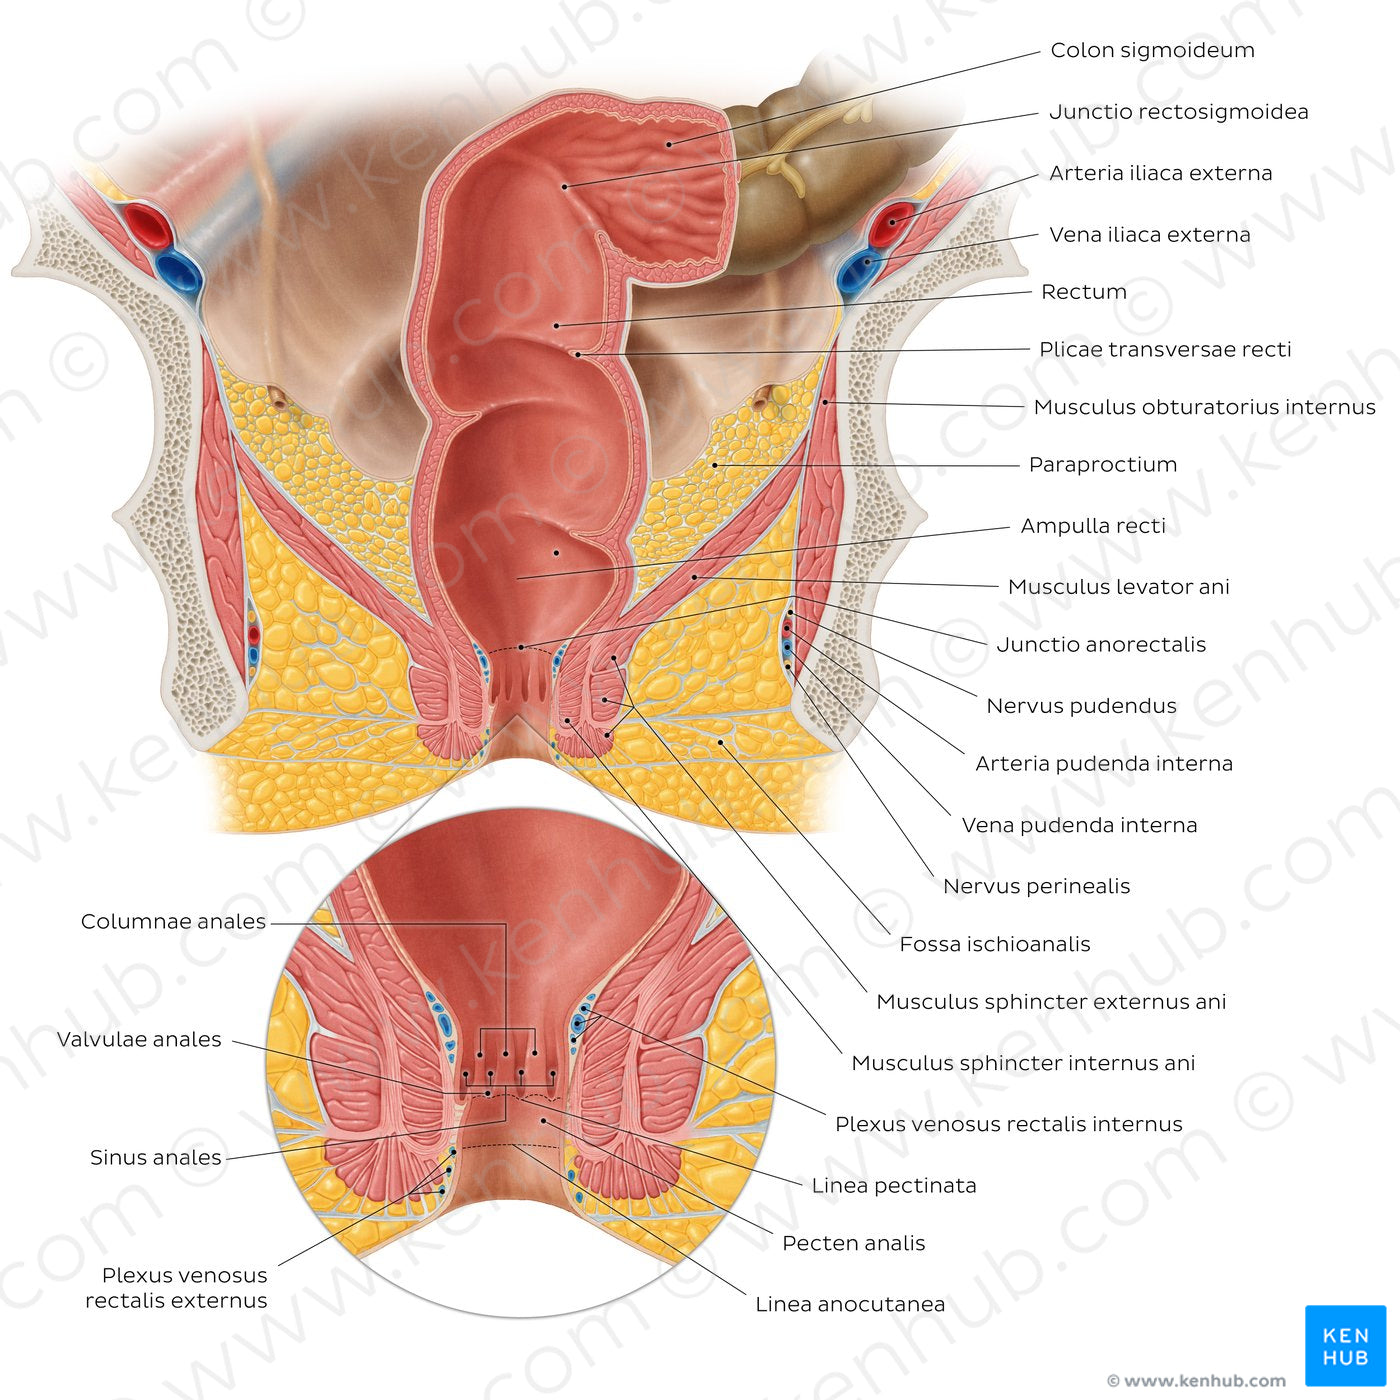 Rectum and anal canal (Latin)